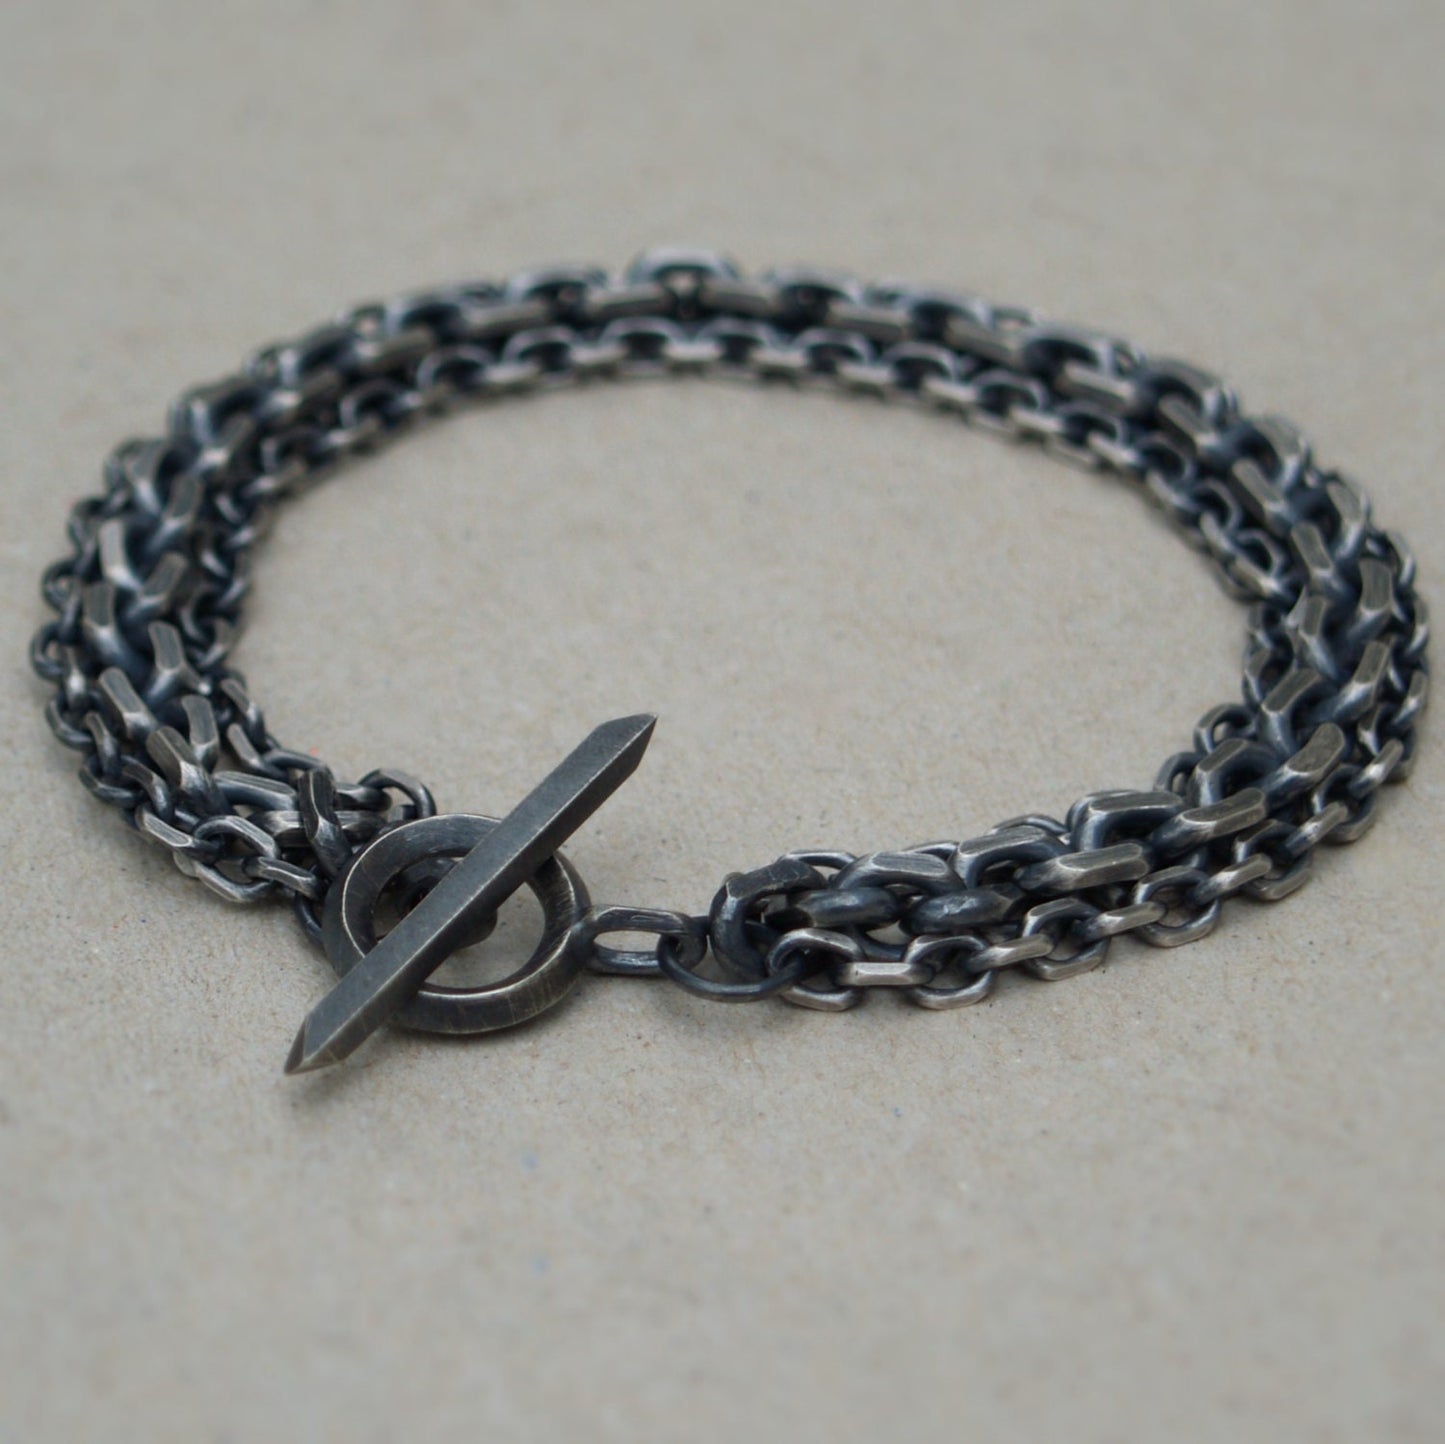 Handmade to order - Oxidised or polished solid silver heavy triple diamond cut trace chain bracelet with a handmade unique T-bar design